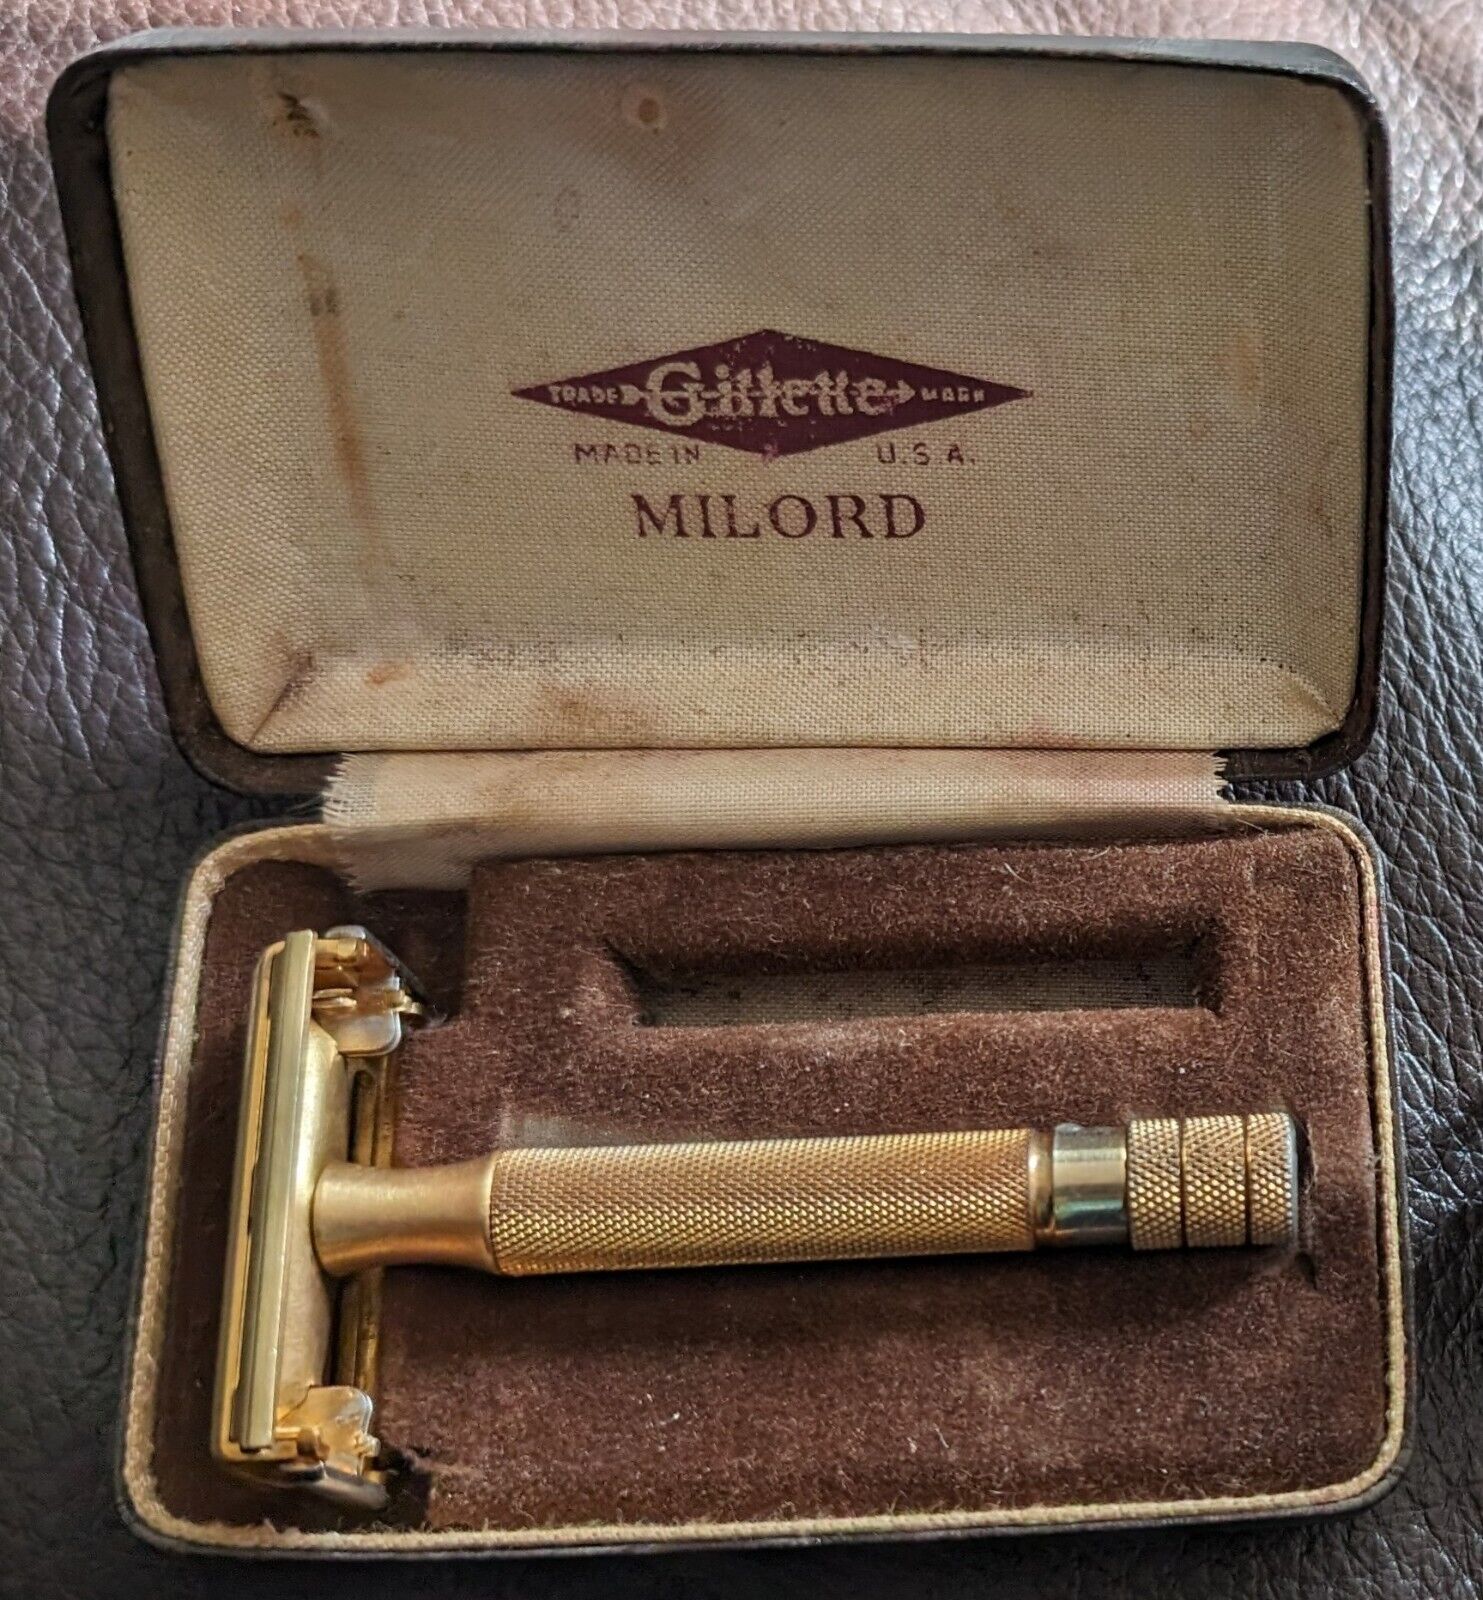 🔥 Vintage 1946 Gillette Milord Double Edge Butterfly Safety Razor With Case🔥